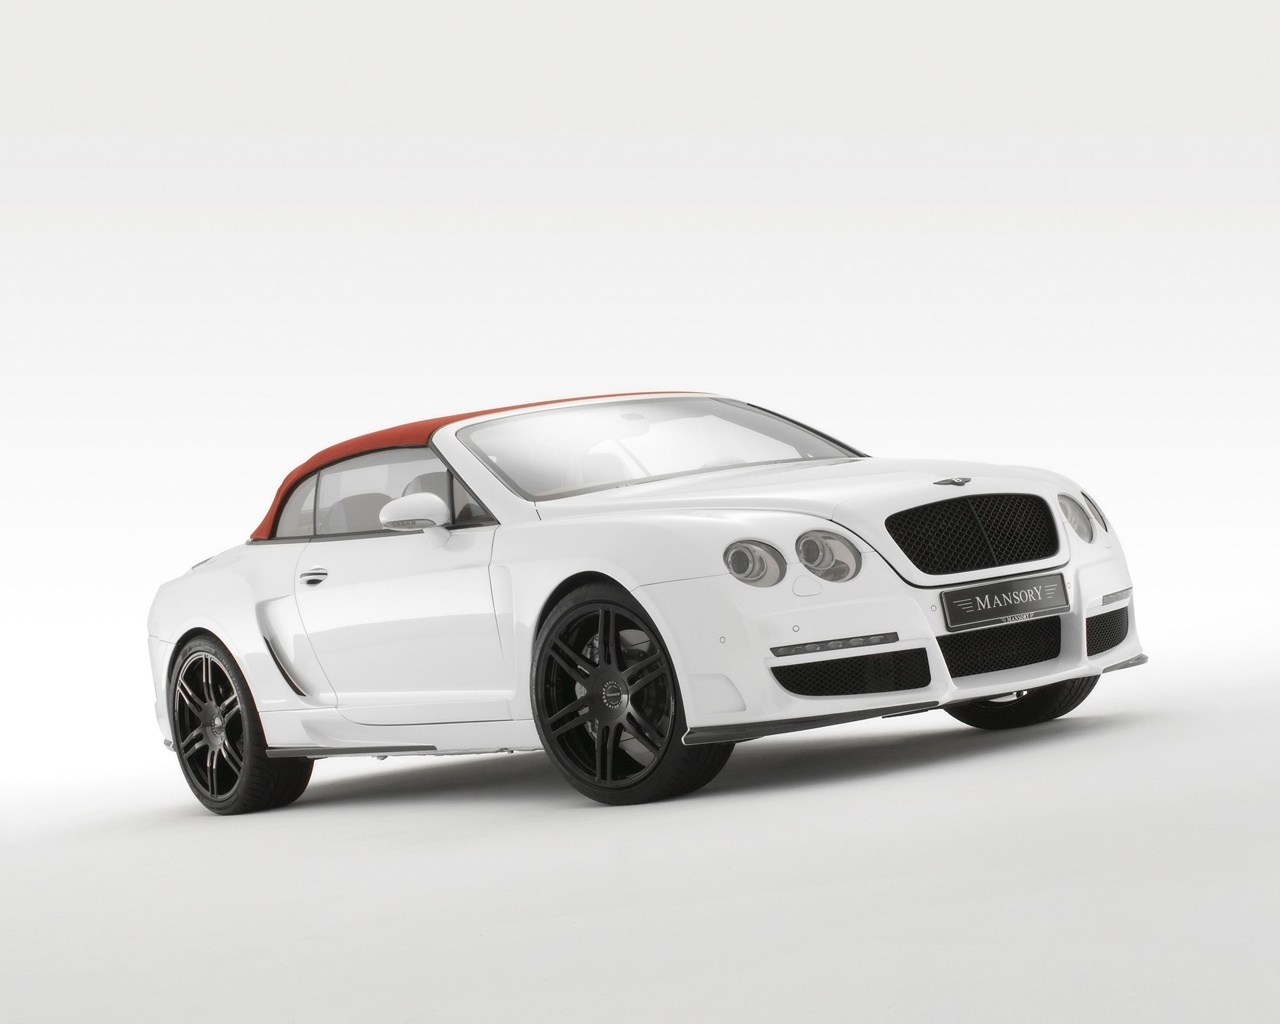 Le Mansory Convertible Bentley Continental GTC 2008 for 1280 x 1024 resolution